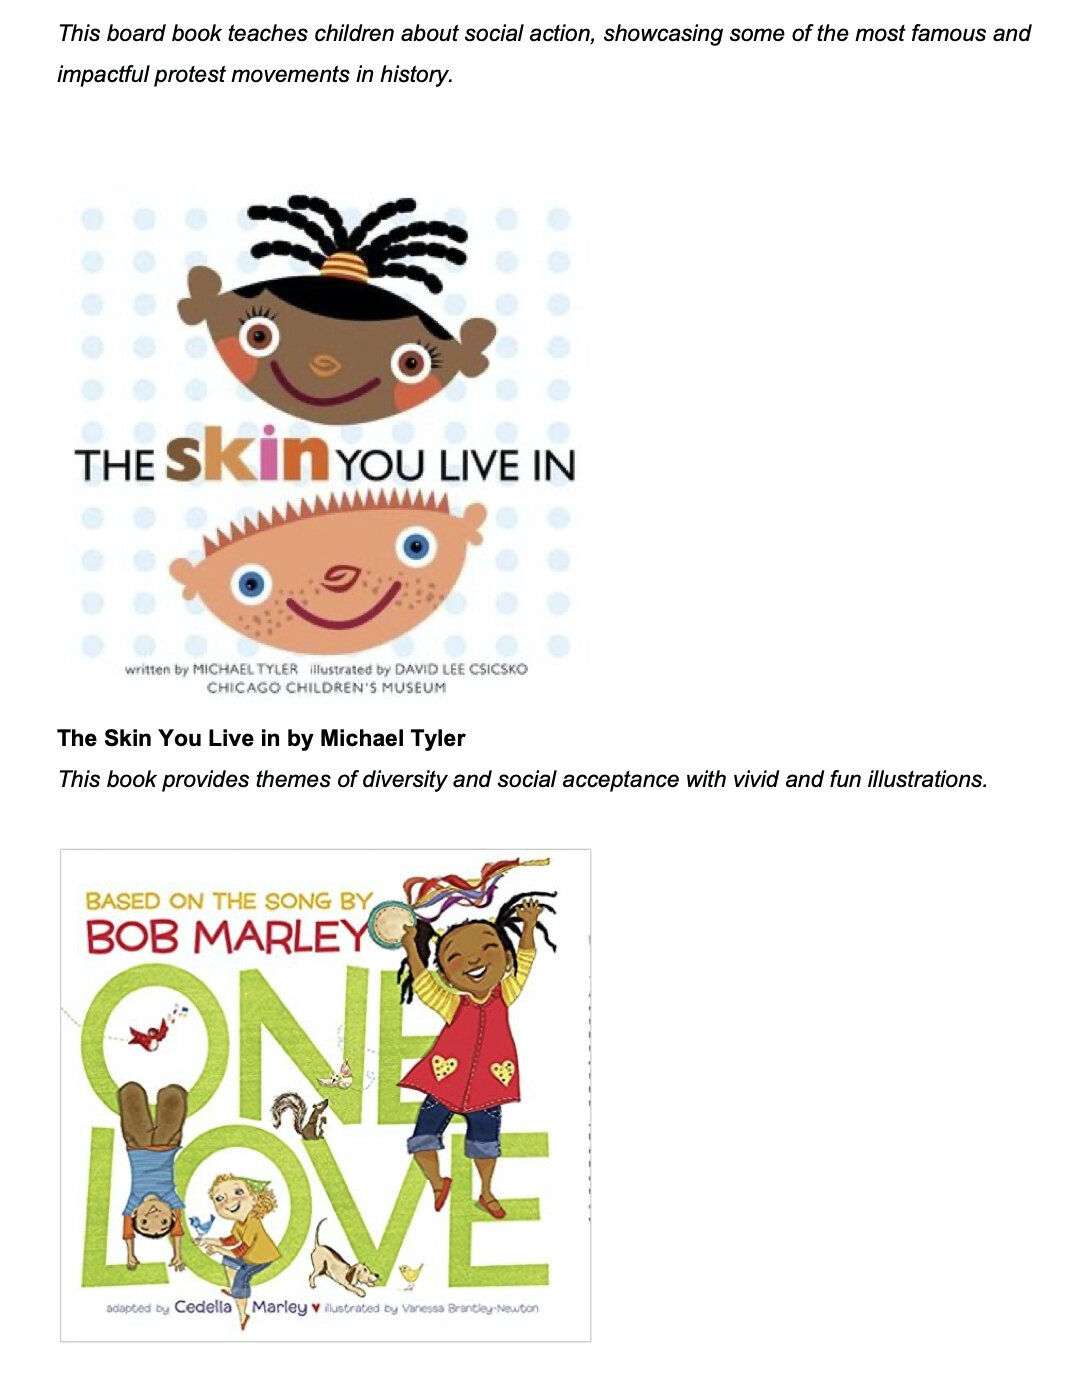 2-Childrens books about anti-racism and activism (1).jpg